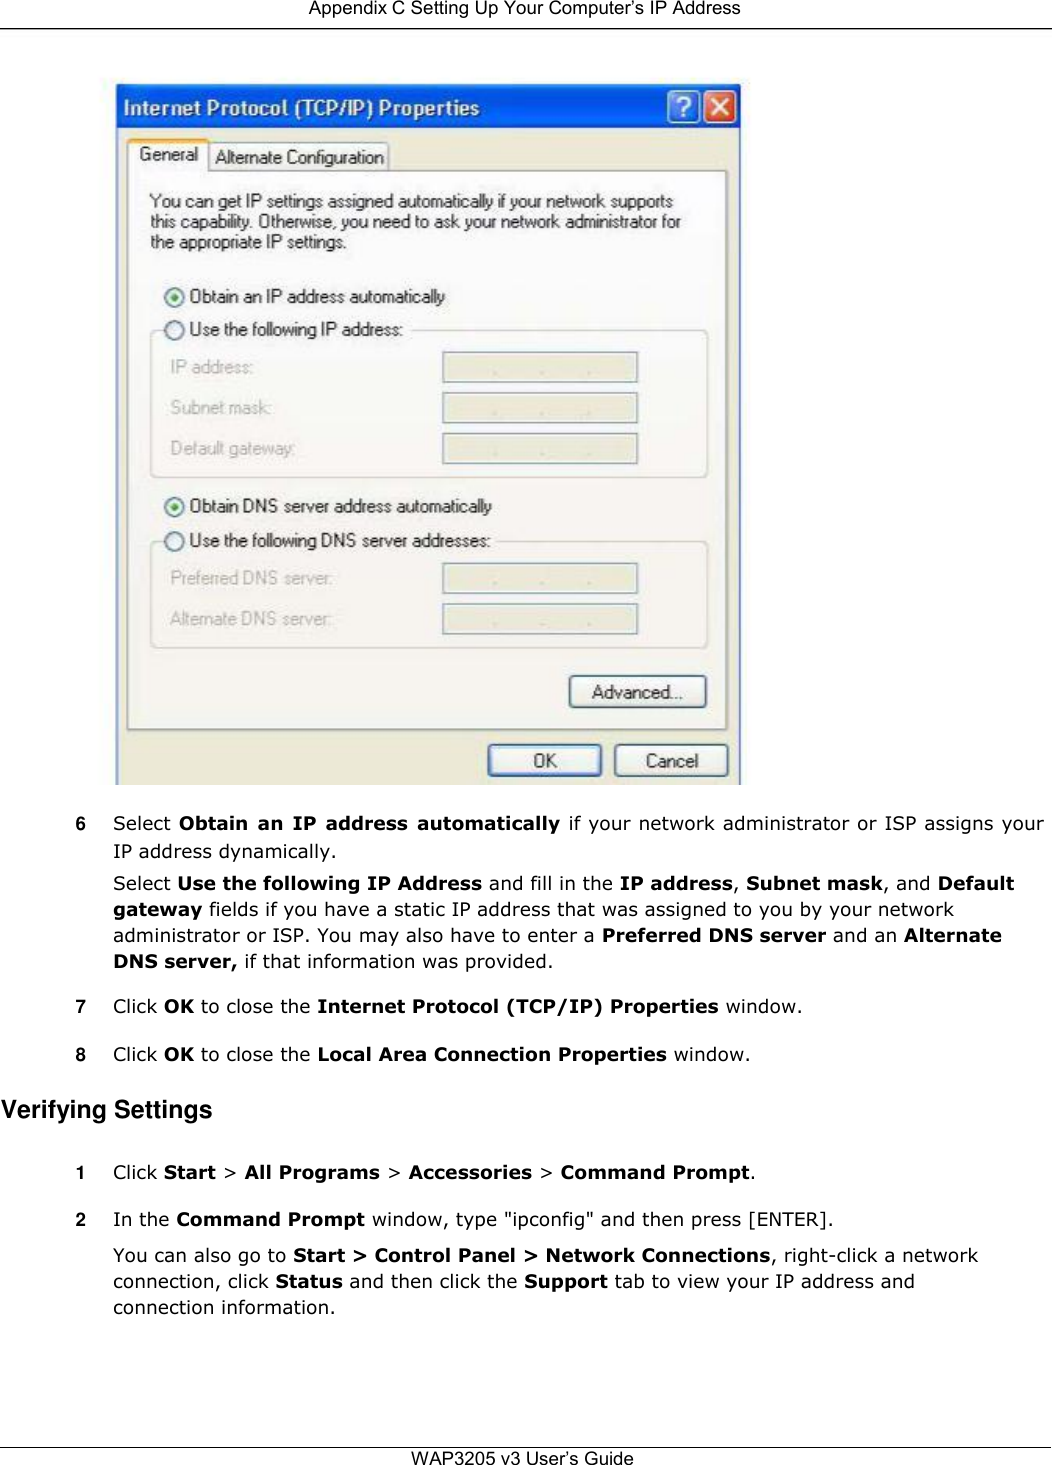  Appendix C Setting Up Your Computer’s IP Address                                       6  Select Obtain  an  IP  address  automatically if your network administrator or ISP assigns your IP address dynamically.  Select Use the following IP Address and fill in the IP address, Subnet mask, and Default gateway fields if you have a static IP address that was assigned to you by your network administrator or ISP. You may also have to enter a Preferred DNS server and an Alternate DNS server, if that information was provided.  7  Click OK to close the Internet Protocol (TCP/IP) Properties window.  8  Click OK to close the Local Area Connection Properties window.  Verifying Settings  1  Click Start &gt; All Programs &gt; Accessories &gt; Command Prompt.  2  In the Command Prompt window, type &quot;ipconfig&quot; and then press [ENTER].  You can also go to Start &gt; Control Panel &gt; Network Connections, right-click a network connection, click Status and then click the Support tab to view your IP address and connection information.       WAP3205 v3 User’s Guide 